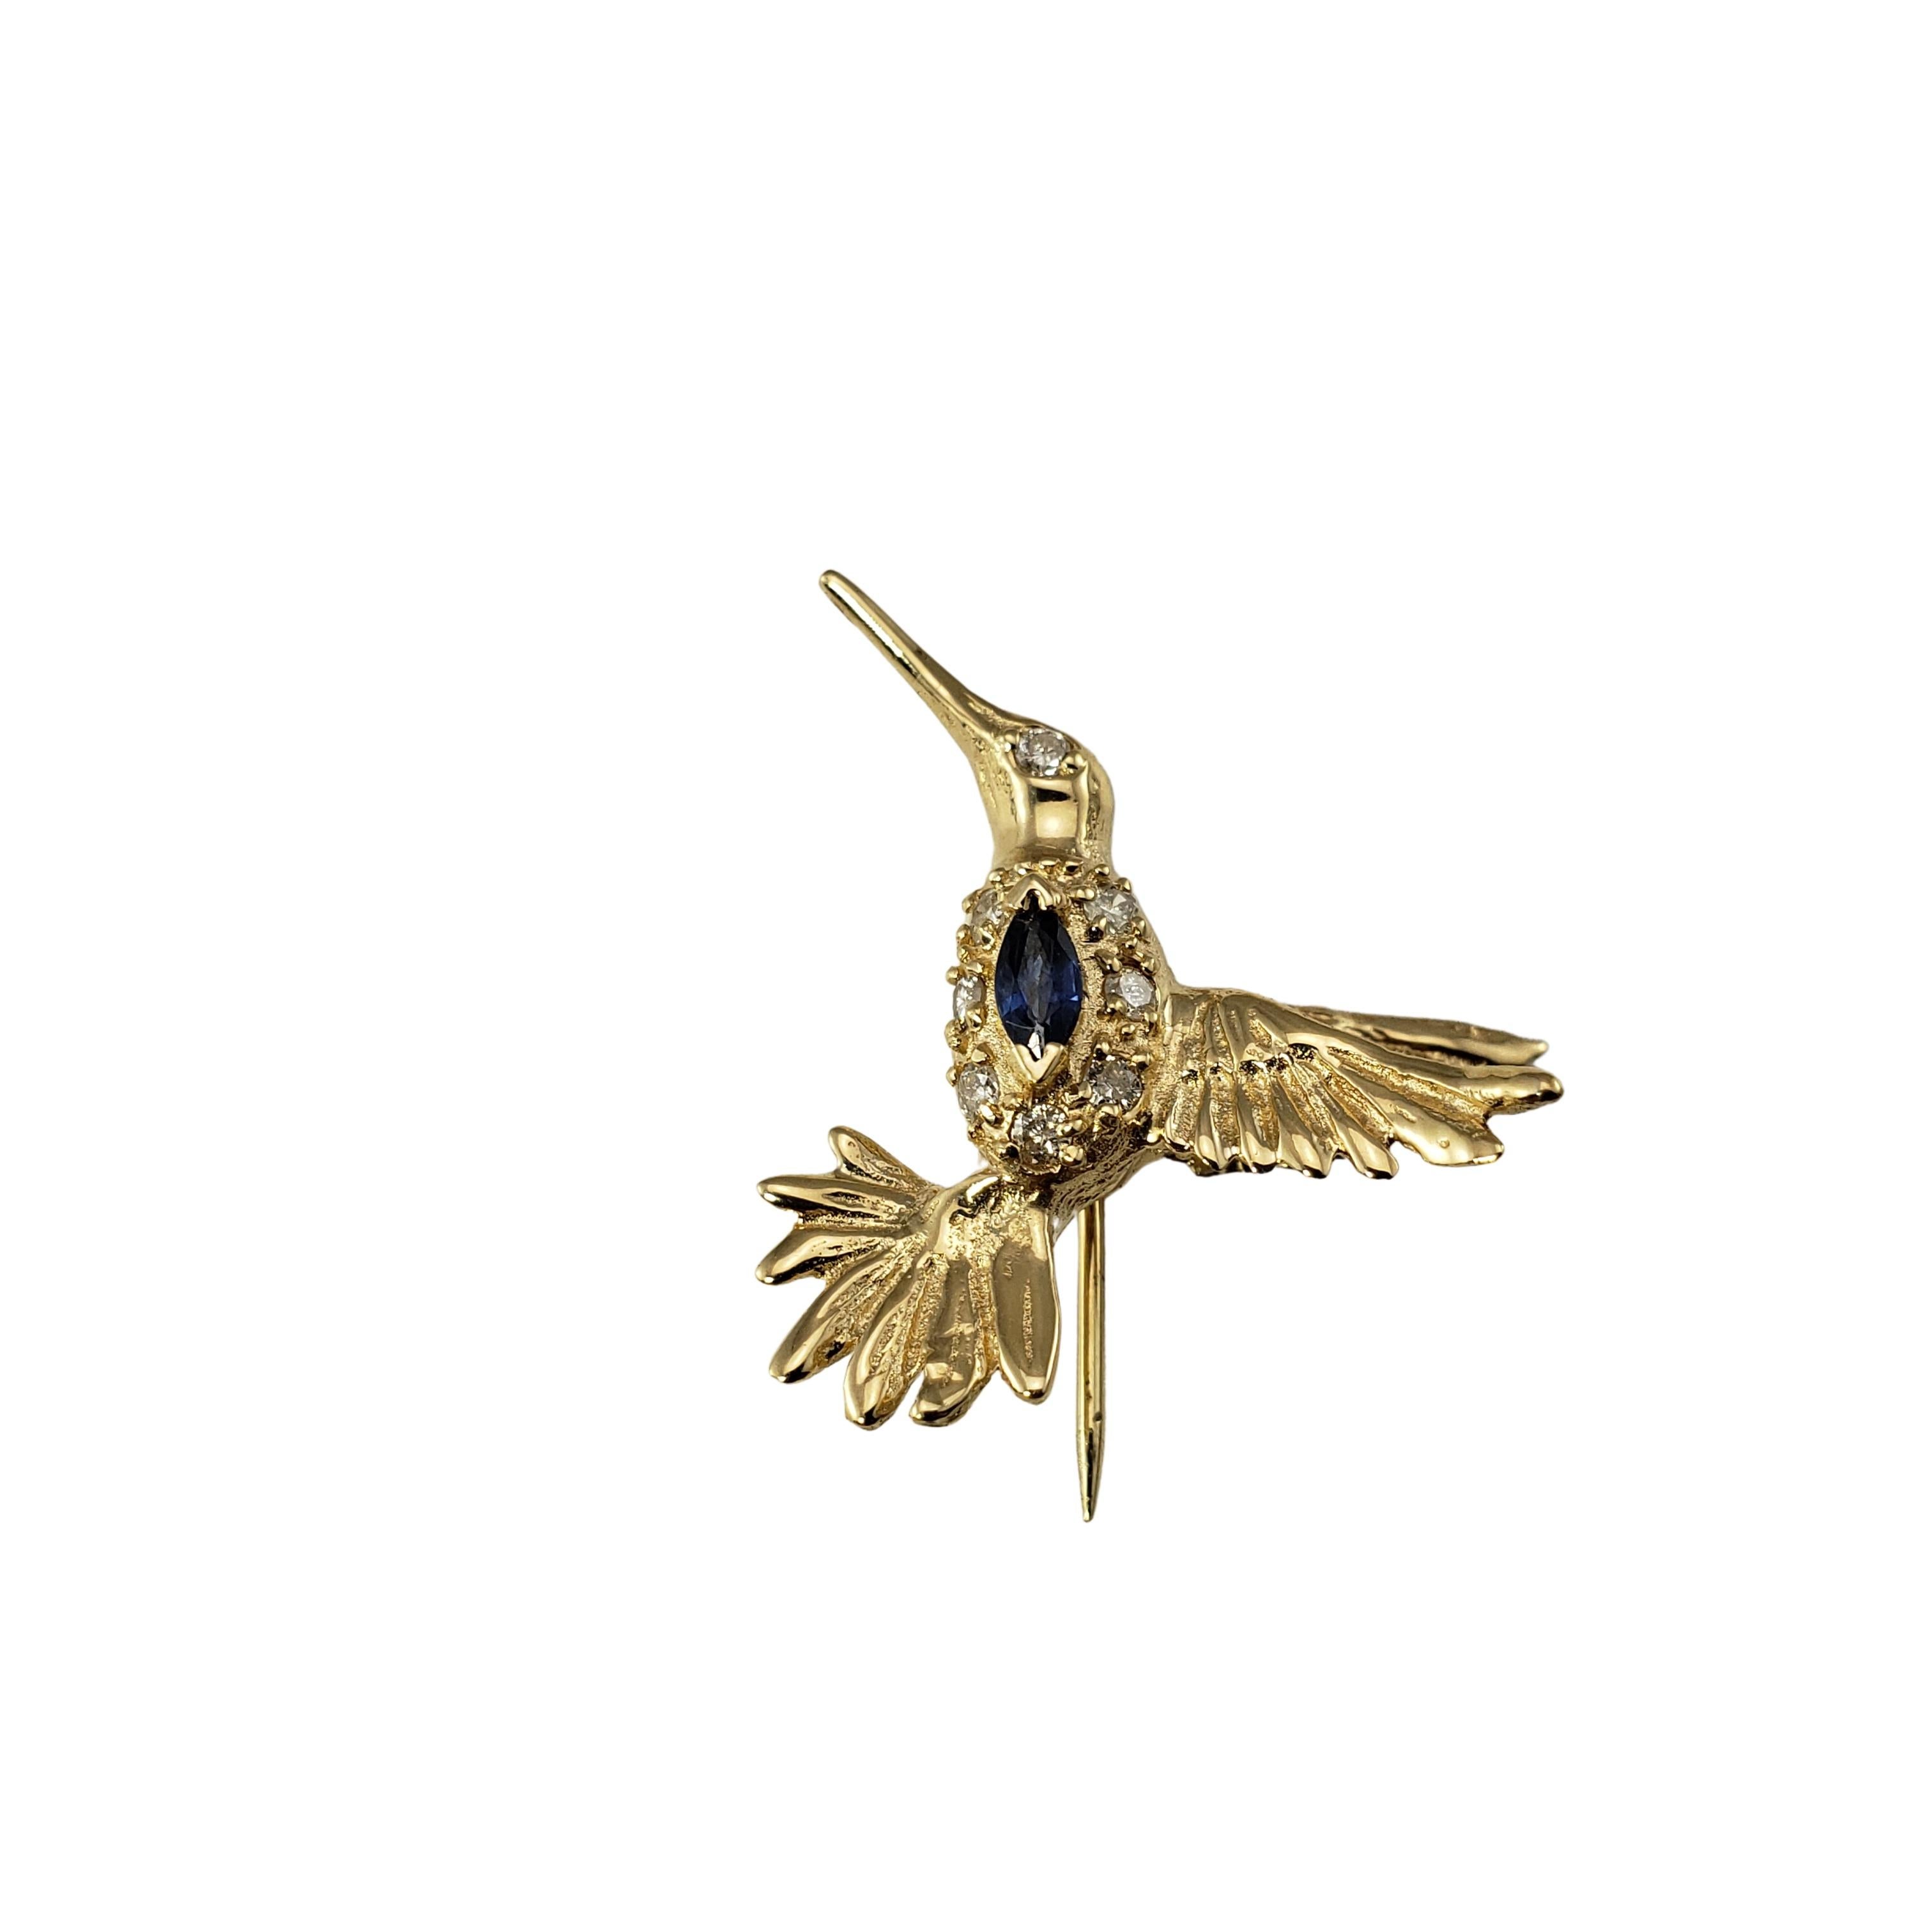 Vintage 14 Karat Yellow Gold Sapphire and Diamond Lapel Pin-

This beautifully detailed hummingbird pin features one marquis sapphire and five round brilliant cut diamonds set in 14K yellow gold.

Approximate total diamond weight:  .06 ct.

Diamond